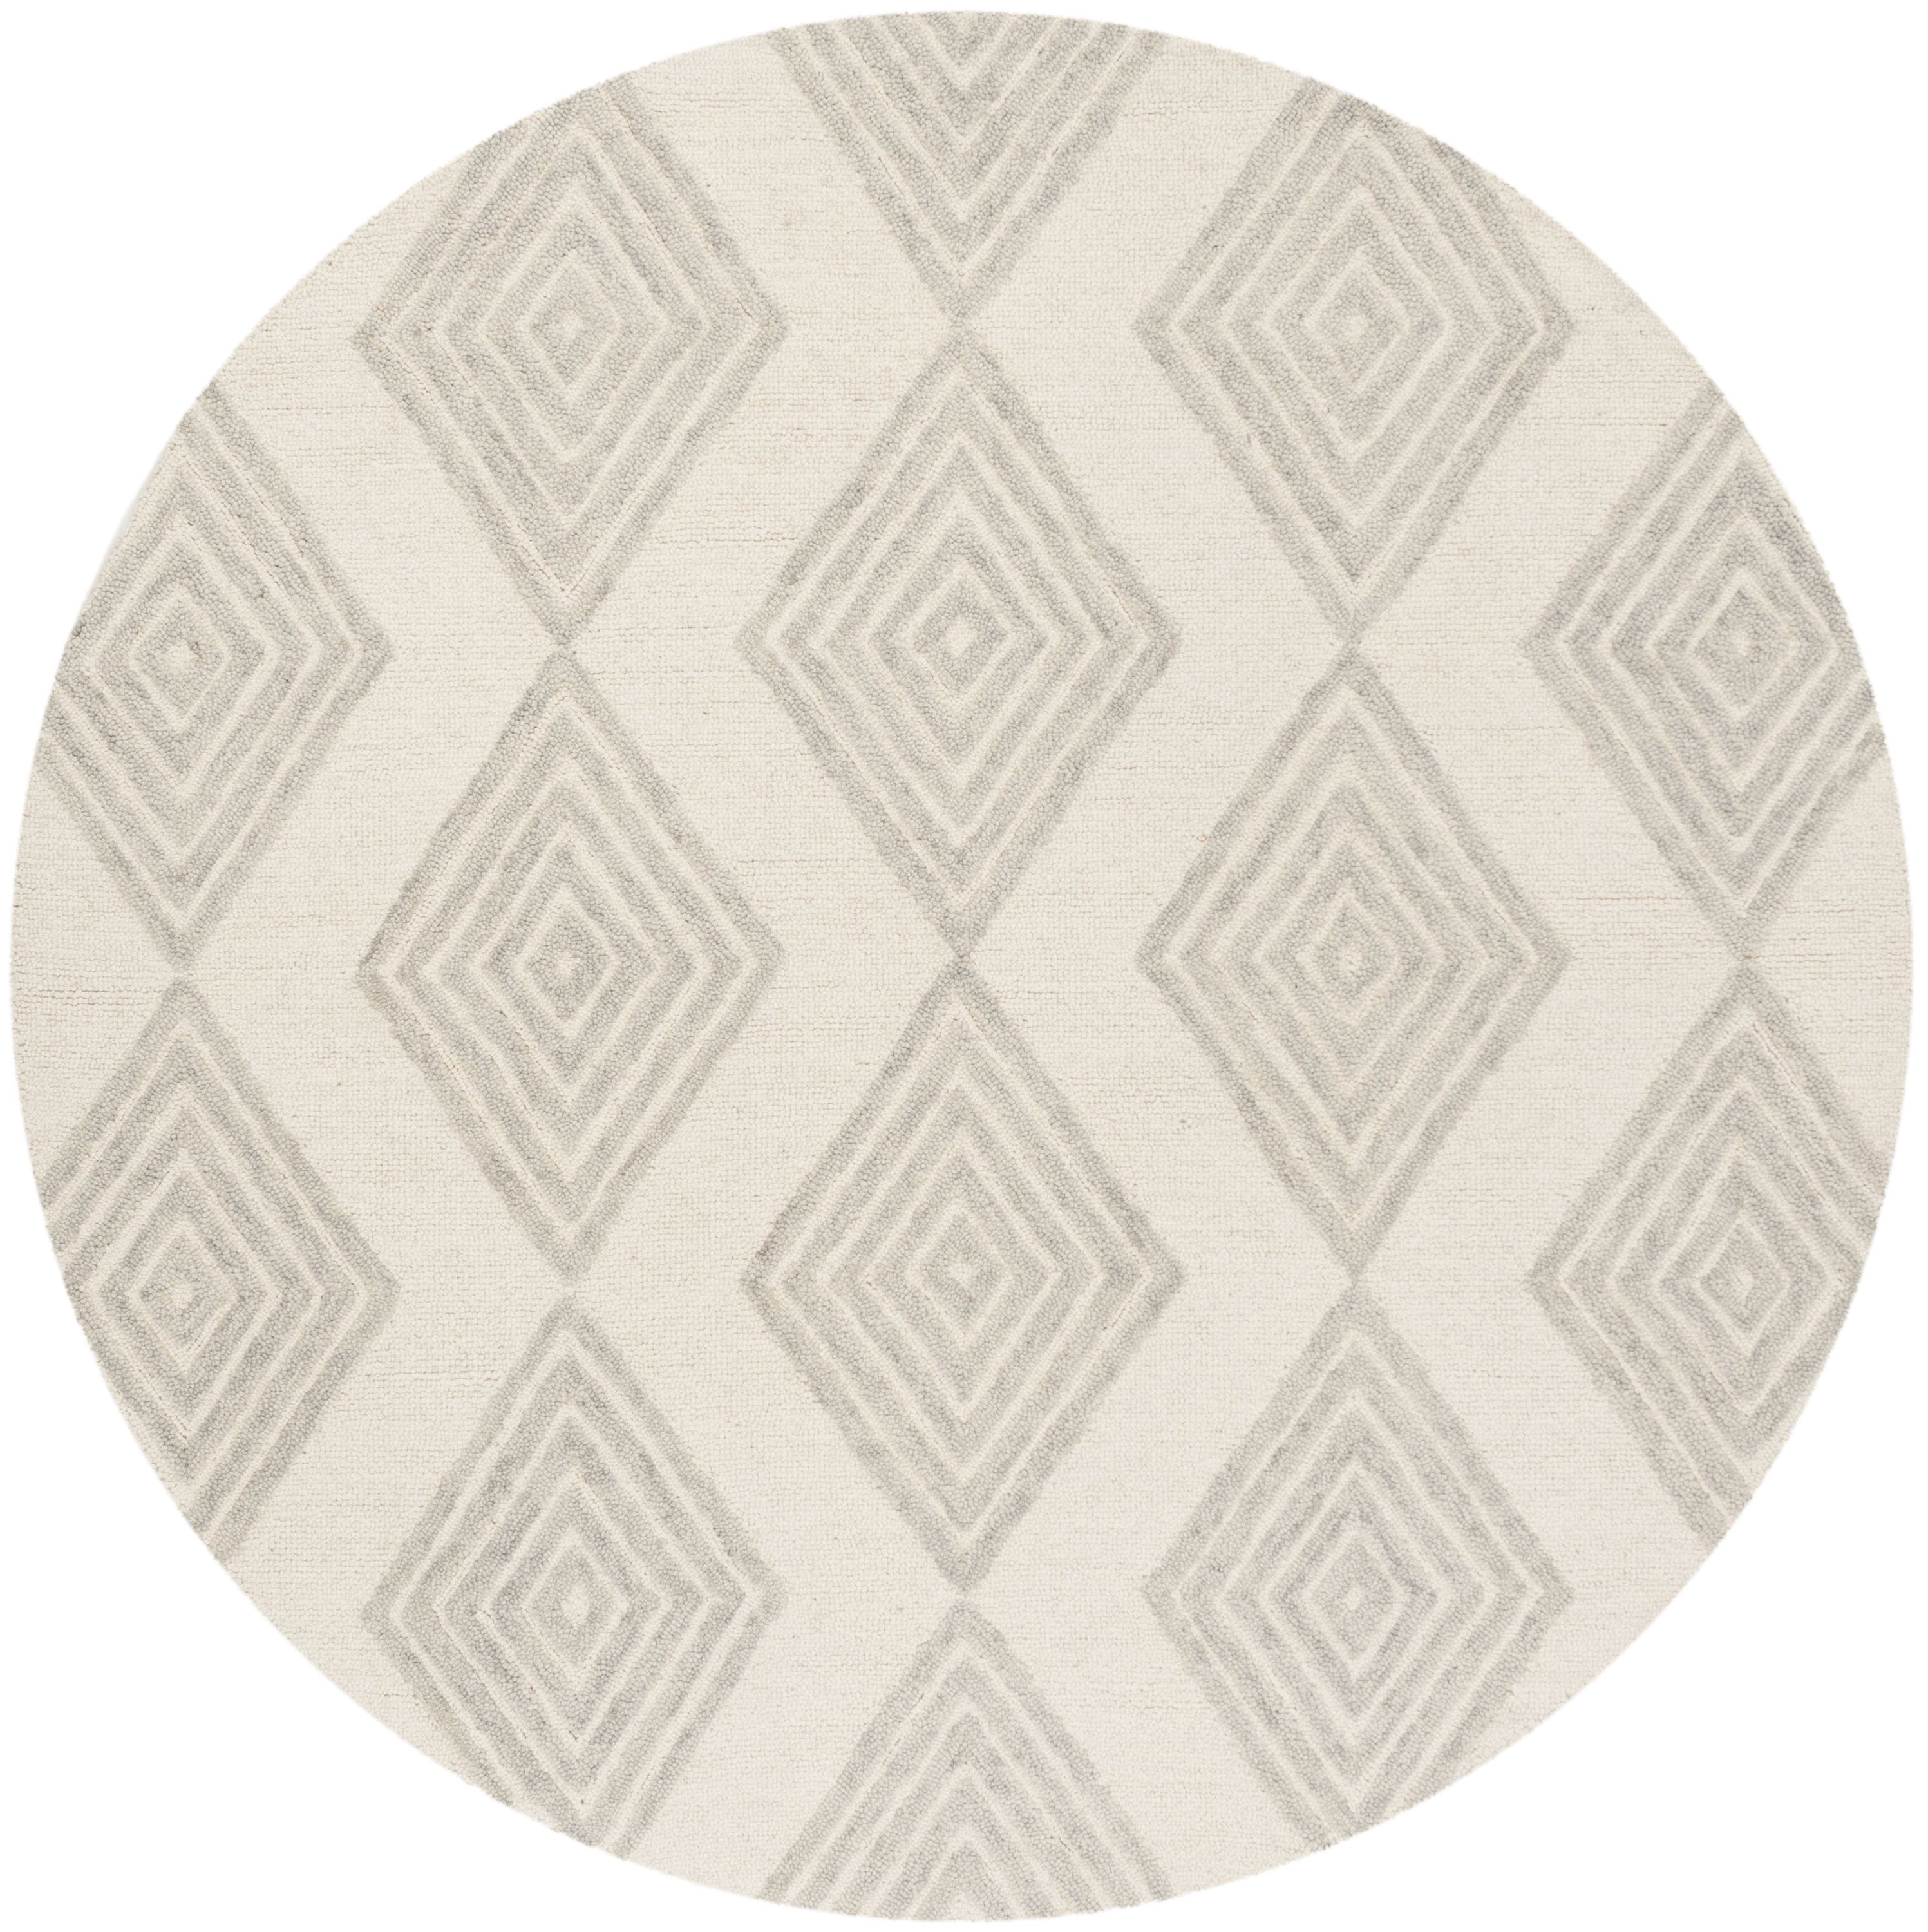 Safavieh Blossom Madora 6 X 6 Wool Ivory/Silver Round Indoor Abstract  Bohemian/Eclectic Area Rug In The Rugs Department At Lowes Inside Ivory Blossom Round Rugs (View 14 of 15)